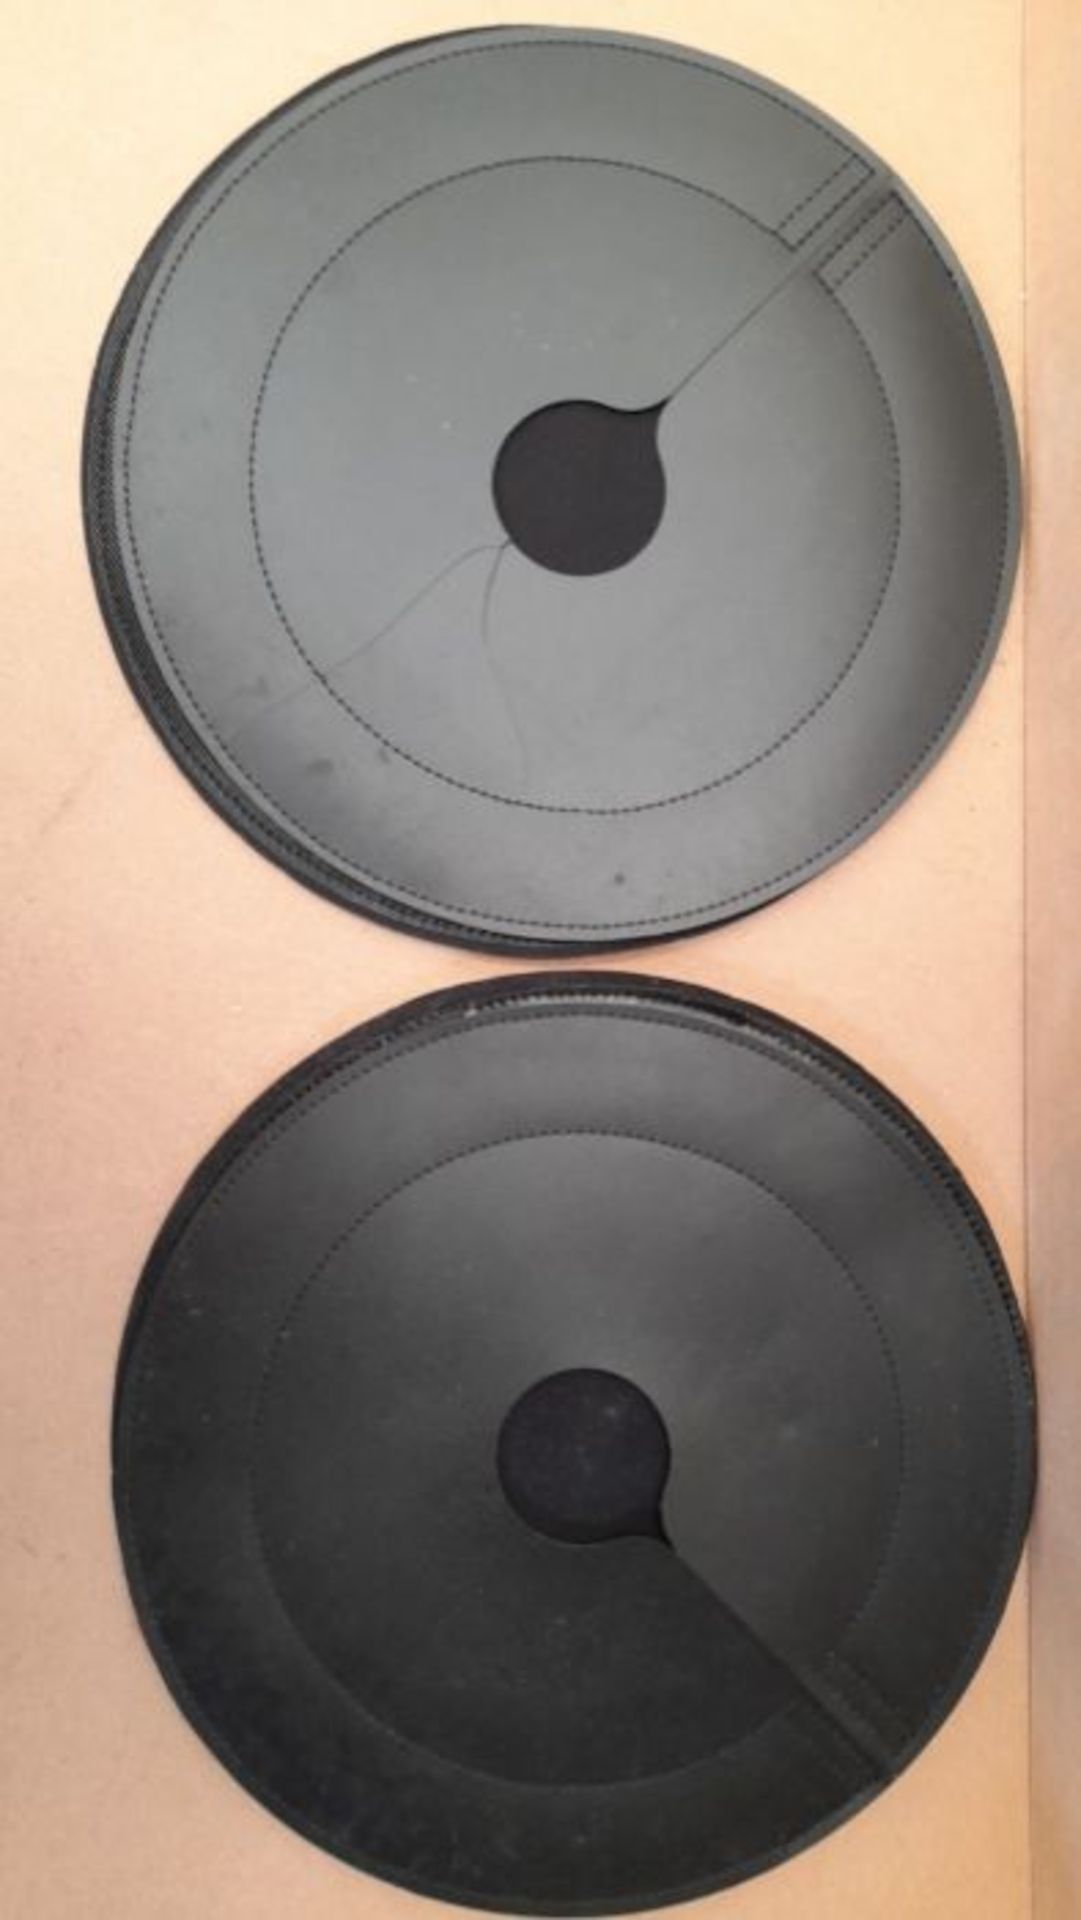 Muc-Off Bolt Disc Brake Covers, Set of 2 - Washable Neoprene Protective Covers for Bic - Image 3 of 3